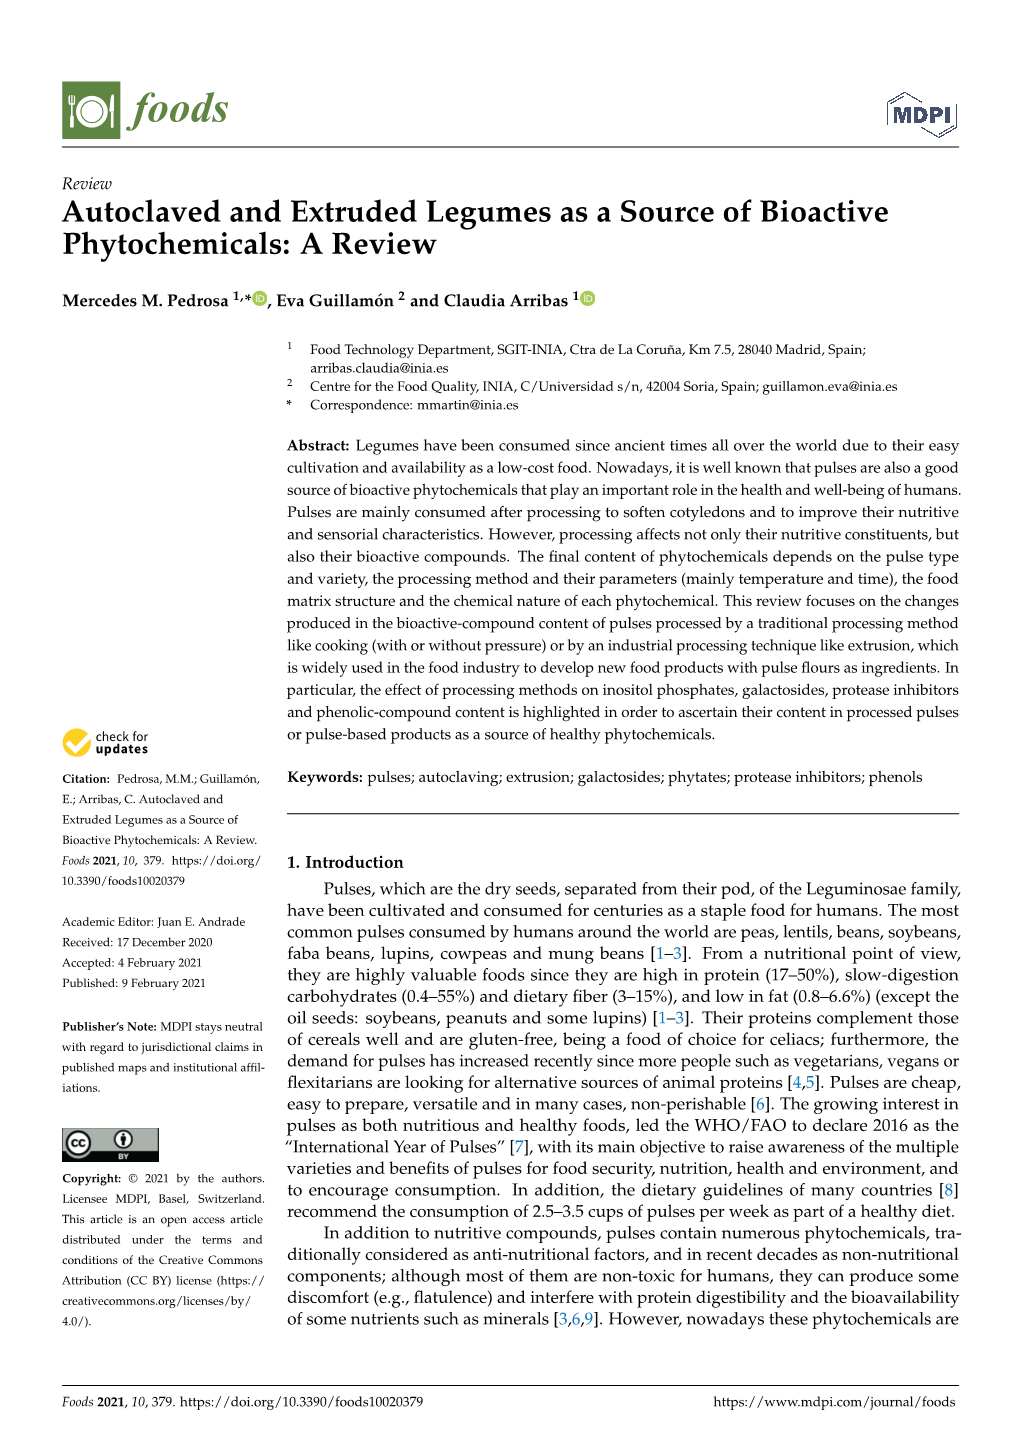 Autoclaved and Extruded Legumes As a Source of Bioactive Phytochemicals: a Review